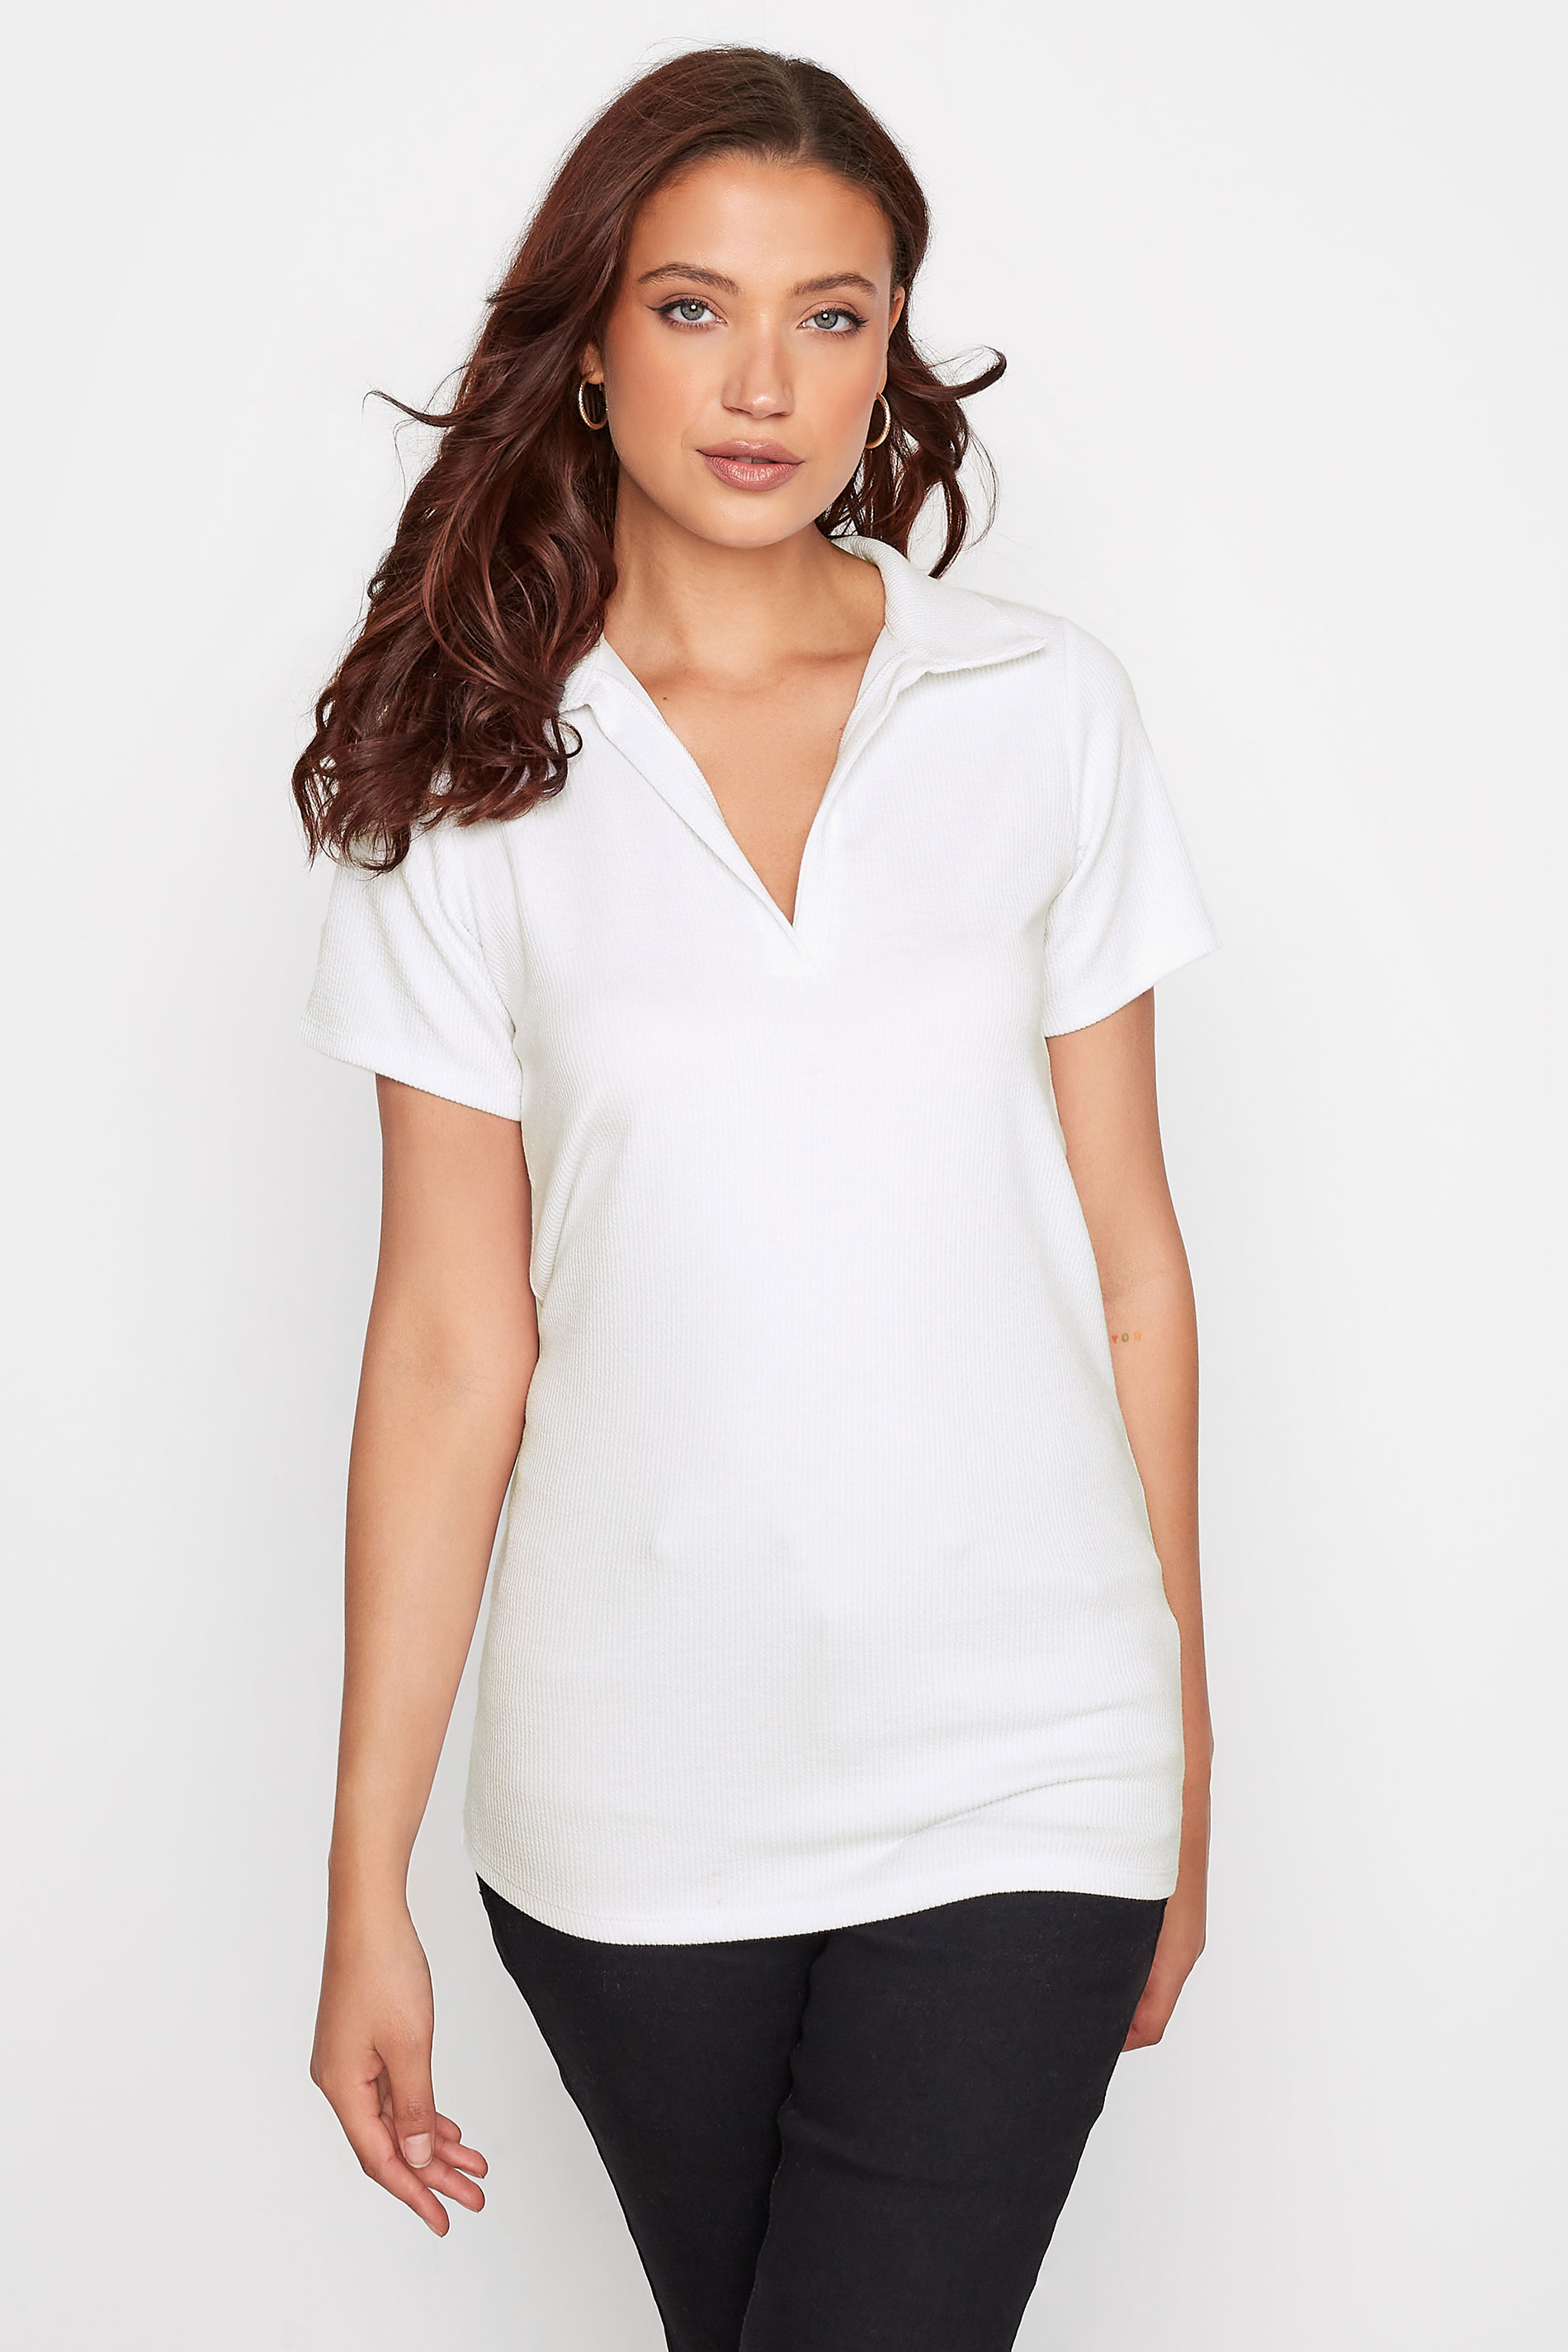 LTS Tall Women's White Short Sleeve Collared Top | Long Tall Sally  1